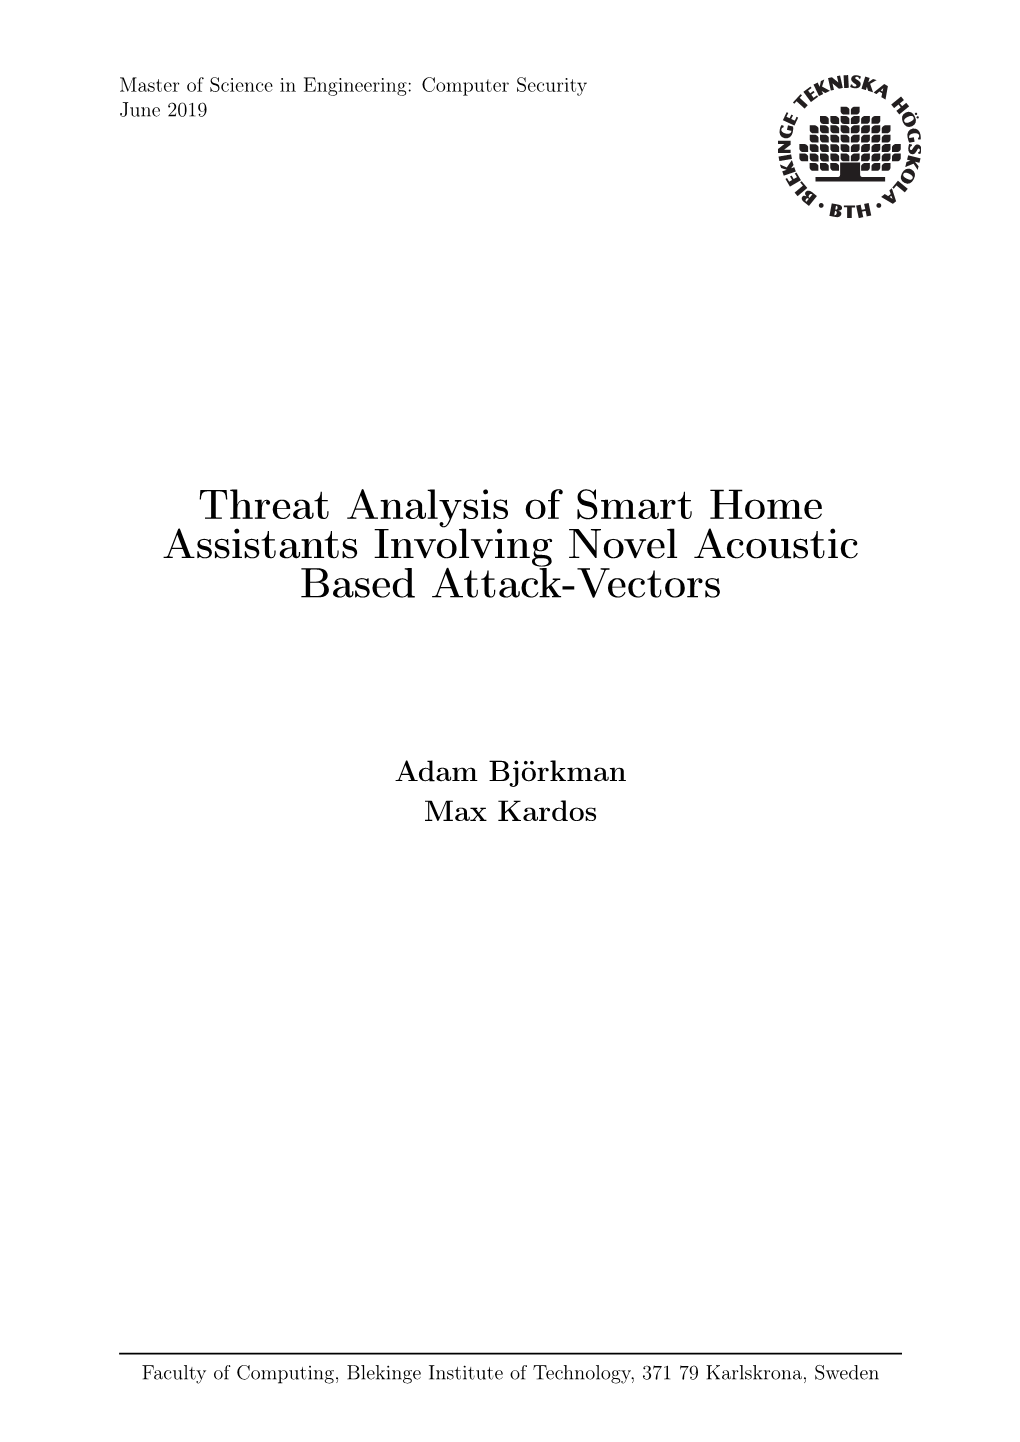 Threat Analysis of Smart Home Assistants Involving Novel Acoustic Based Attack-Vectors